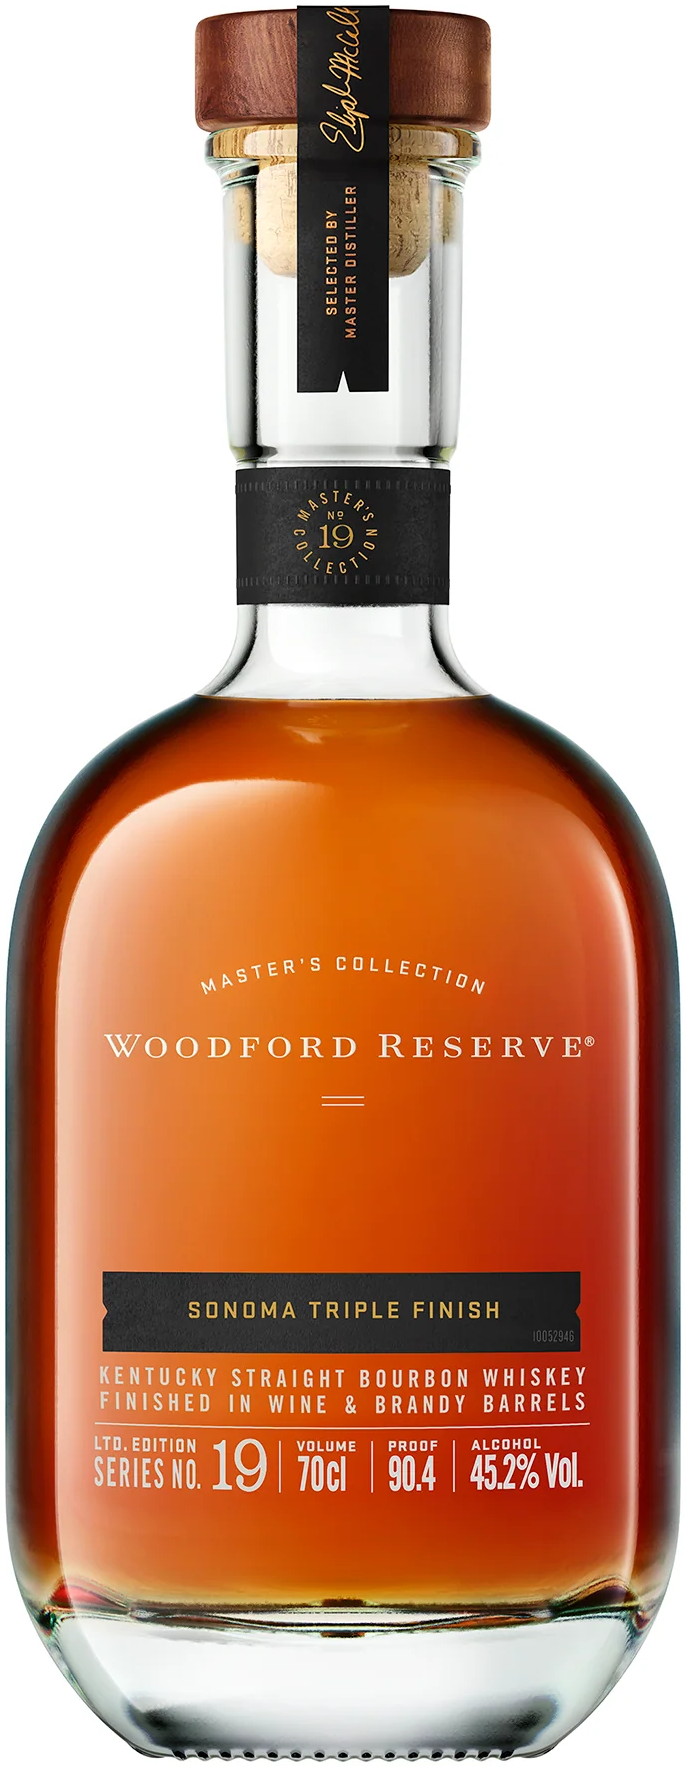 Woodford Reserve Masters Collection Sonoma Triple Finish Bourbon Whiskey 700ml